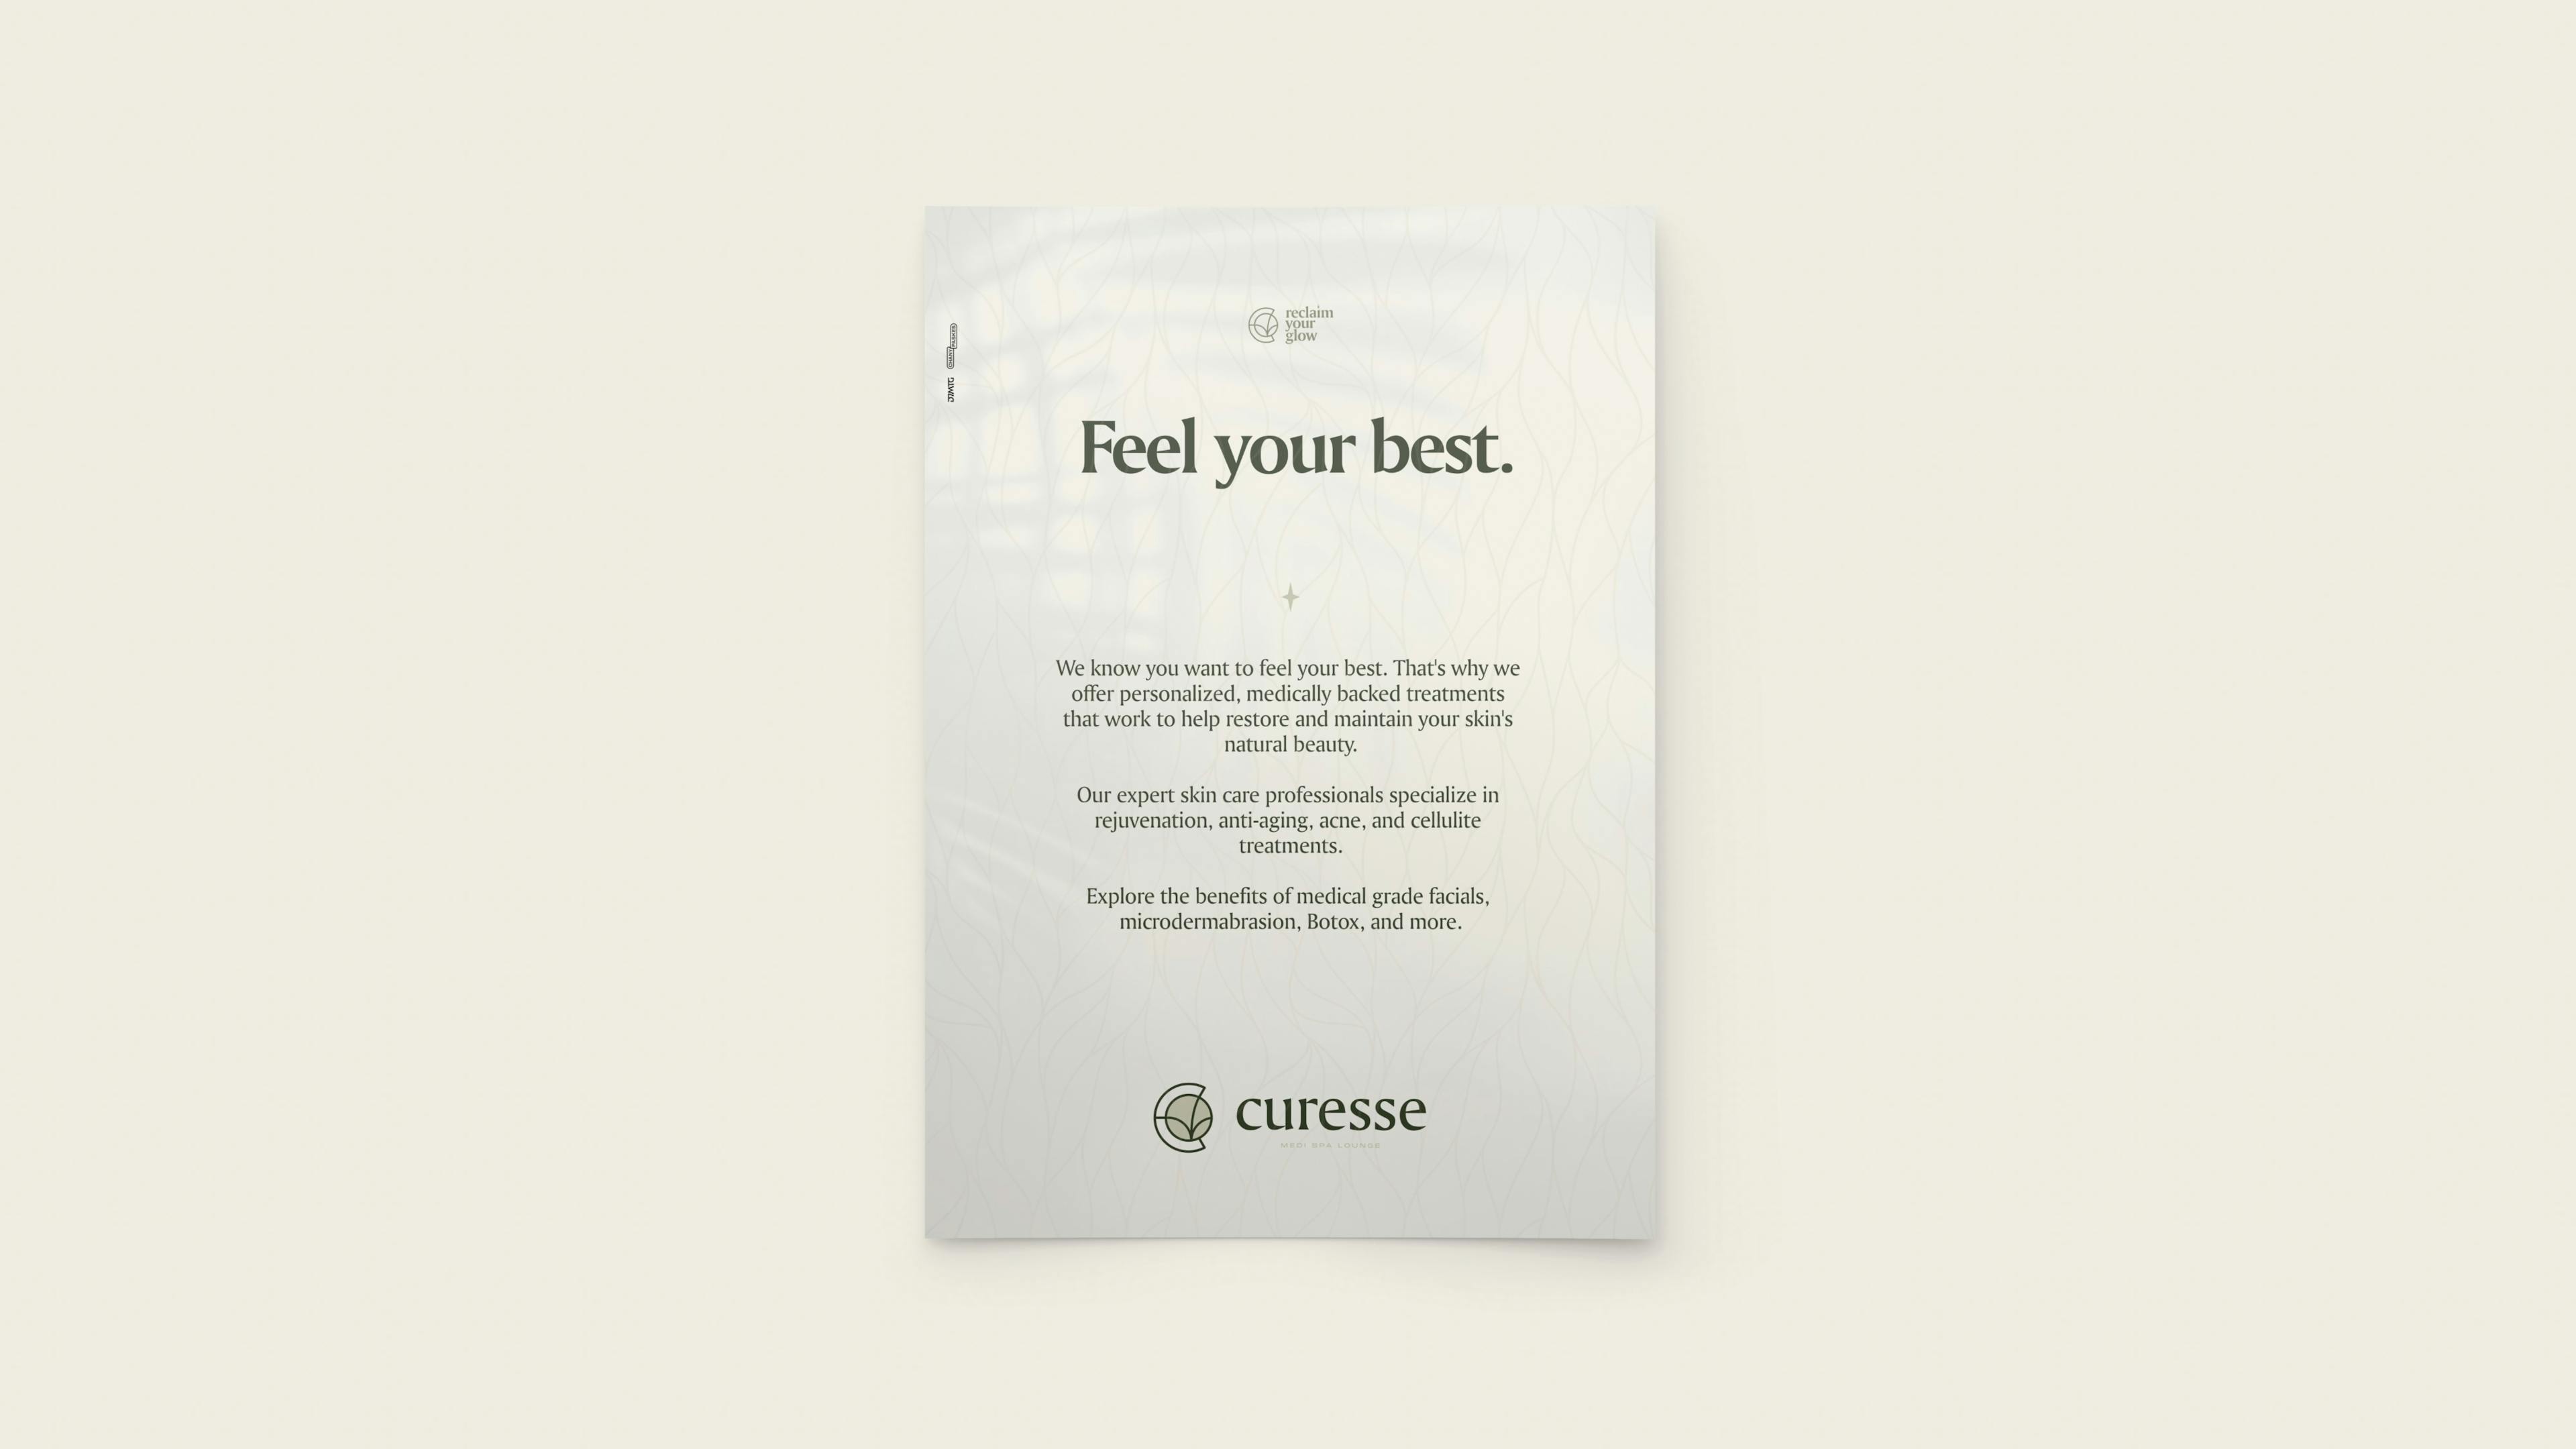 advertisement for curesse medi spa